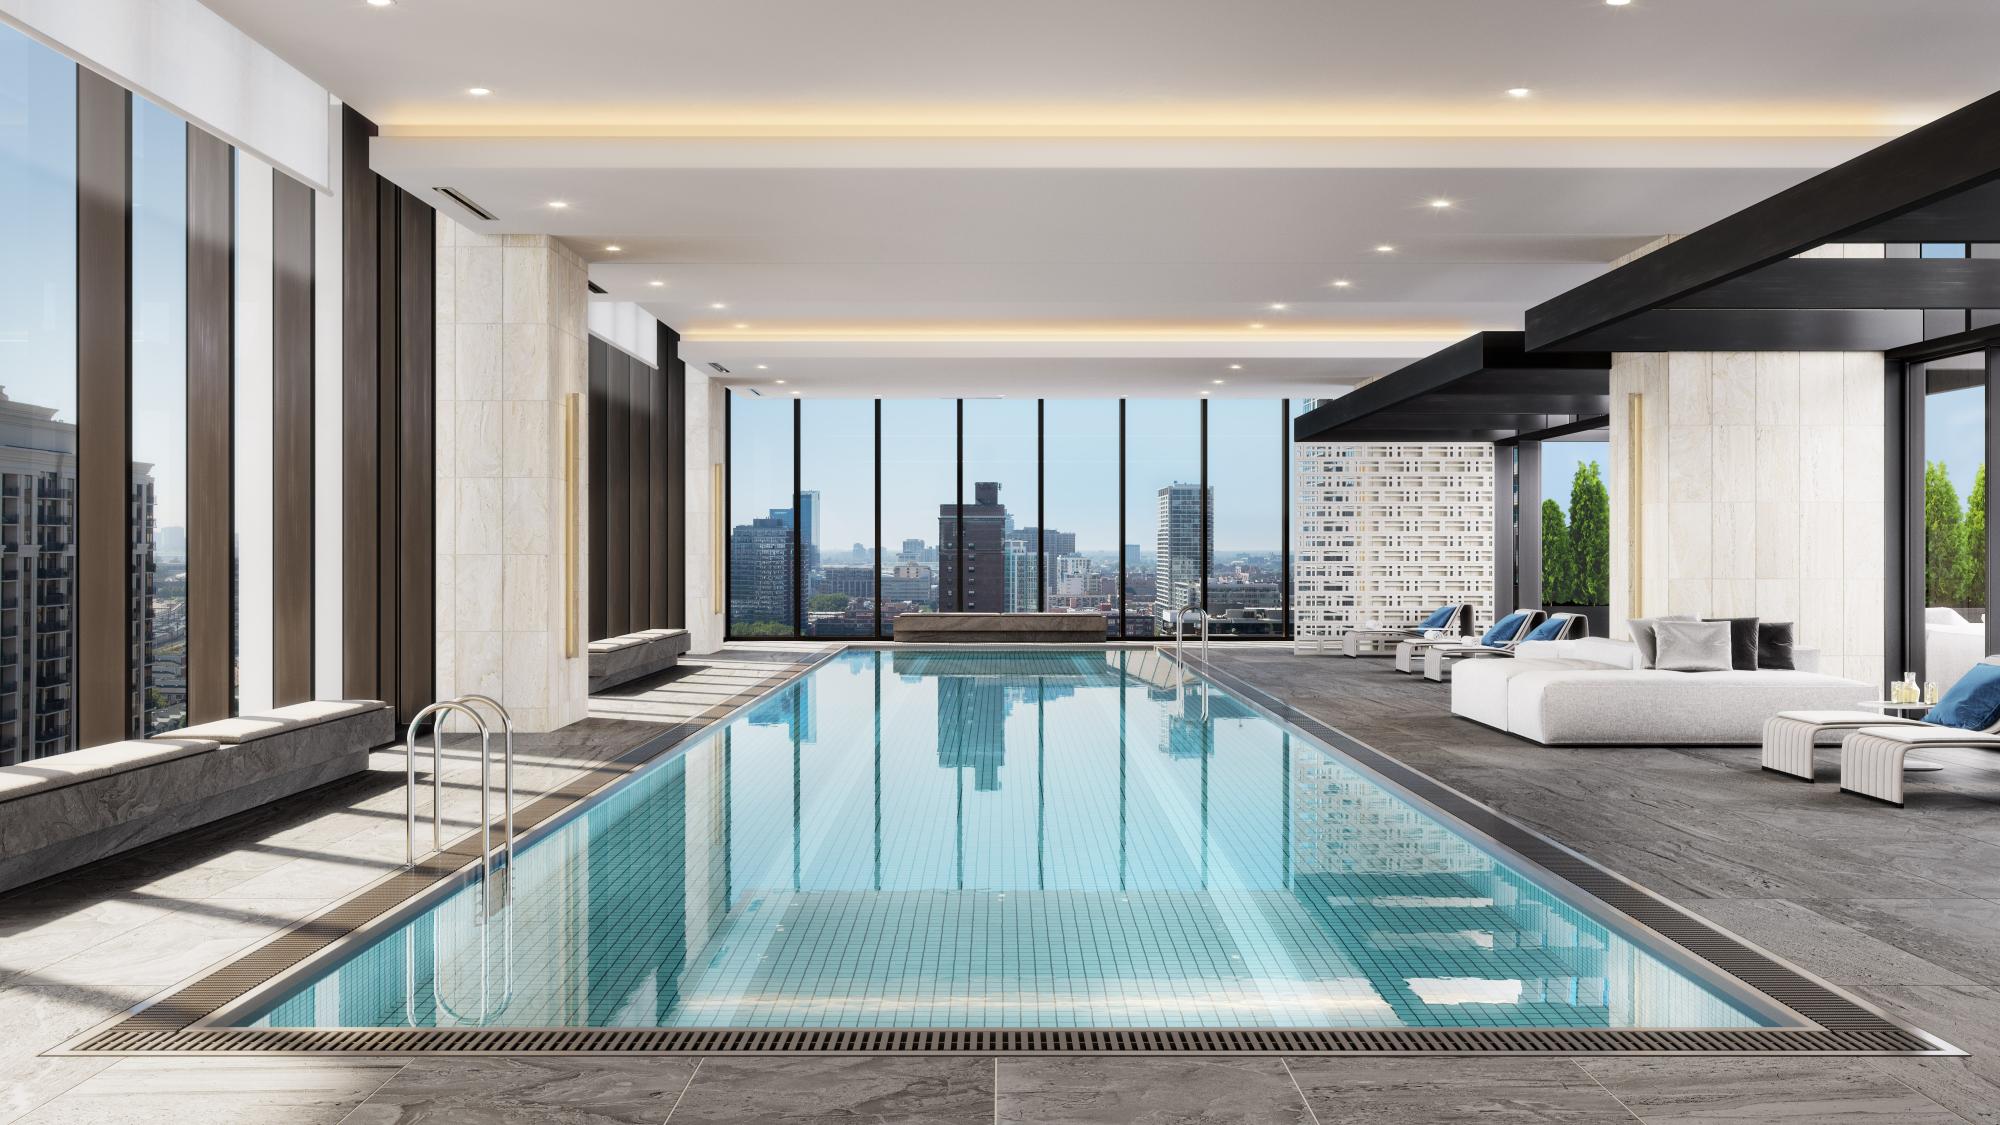 A 75-foot indoor lap pool with floor-to-ceiling windows overlooks Downtown Chicago.